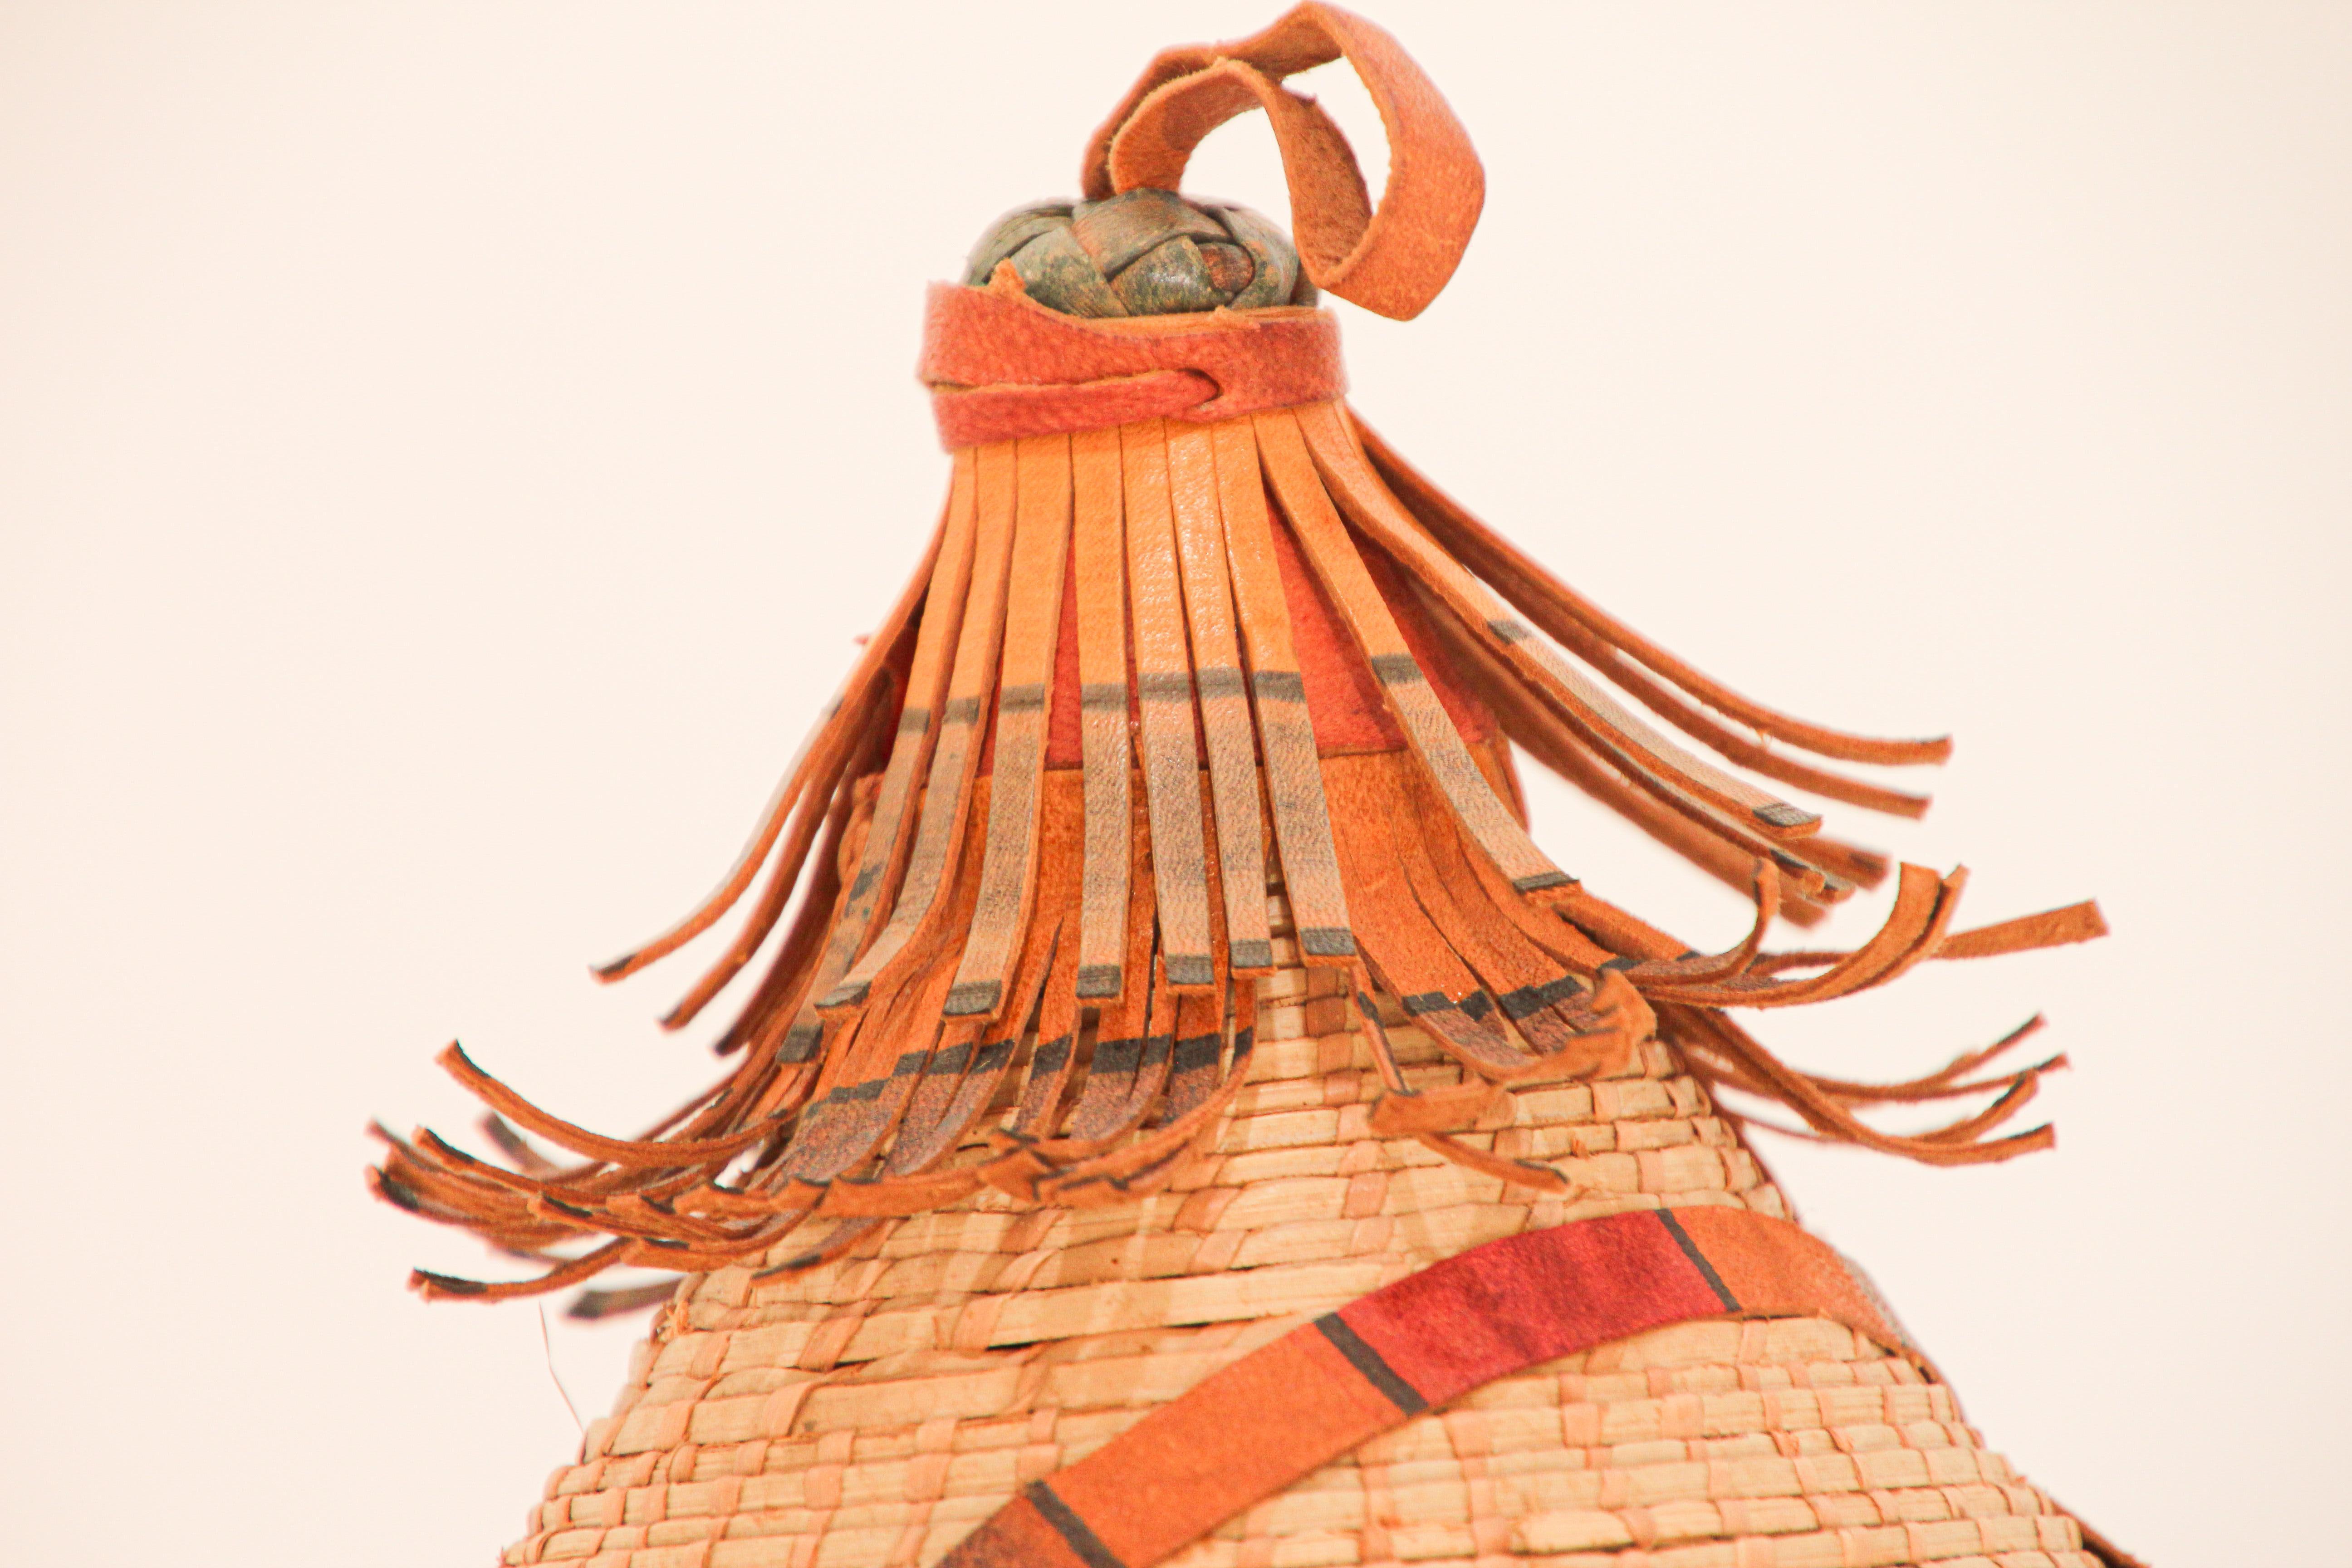 Conical Leather and Straw Tribal Fulani Hat, Mali West Africa In Good Condition For Sale In North Hollywood, CA